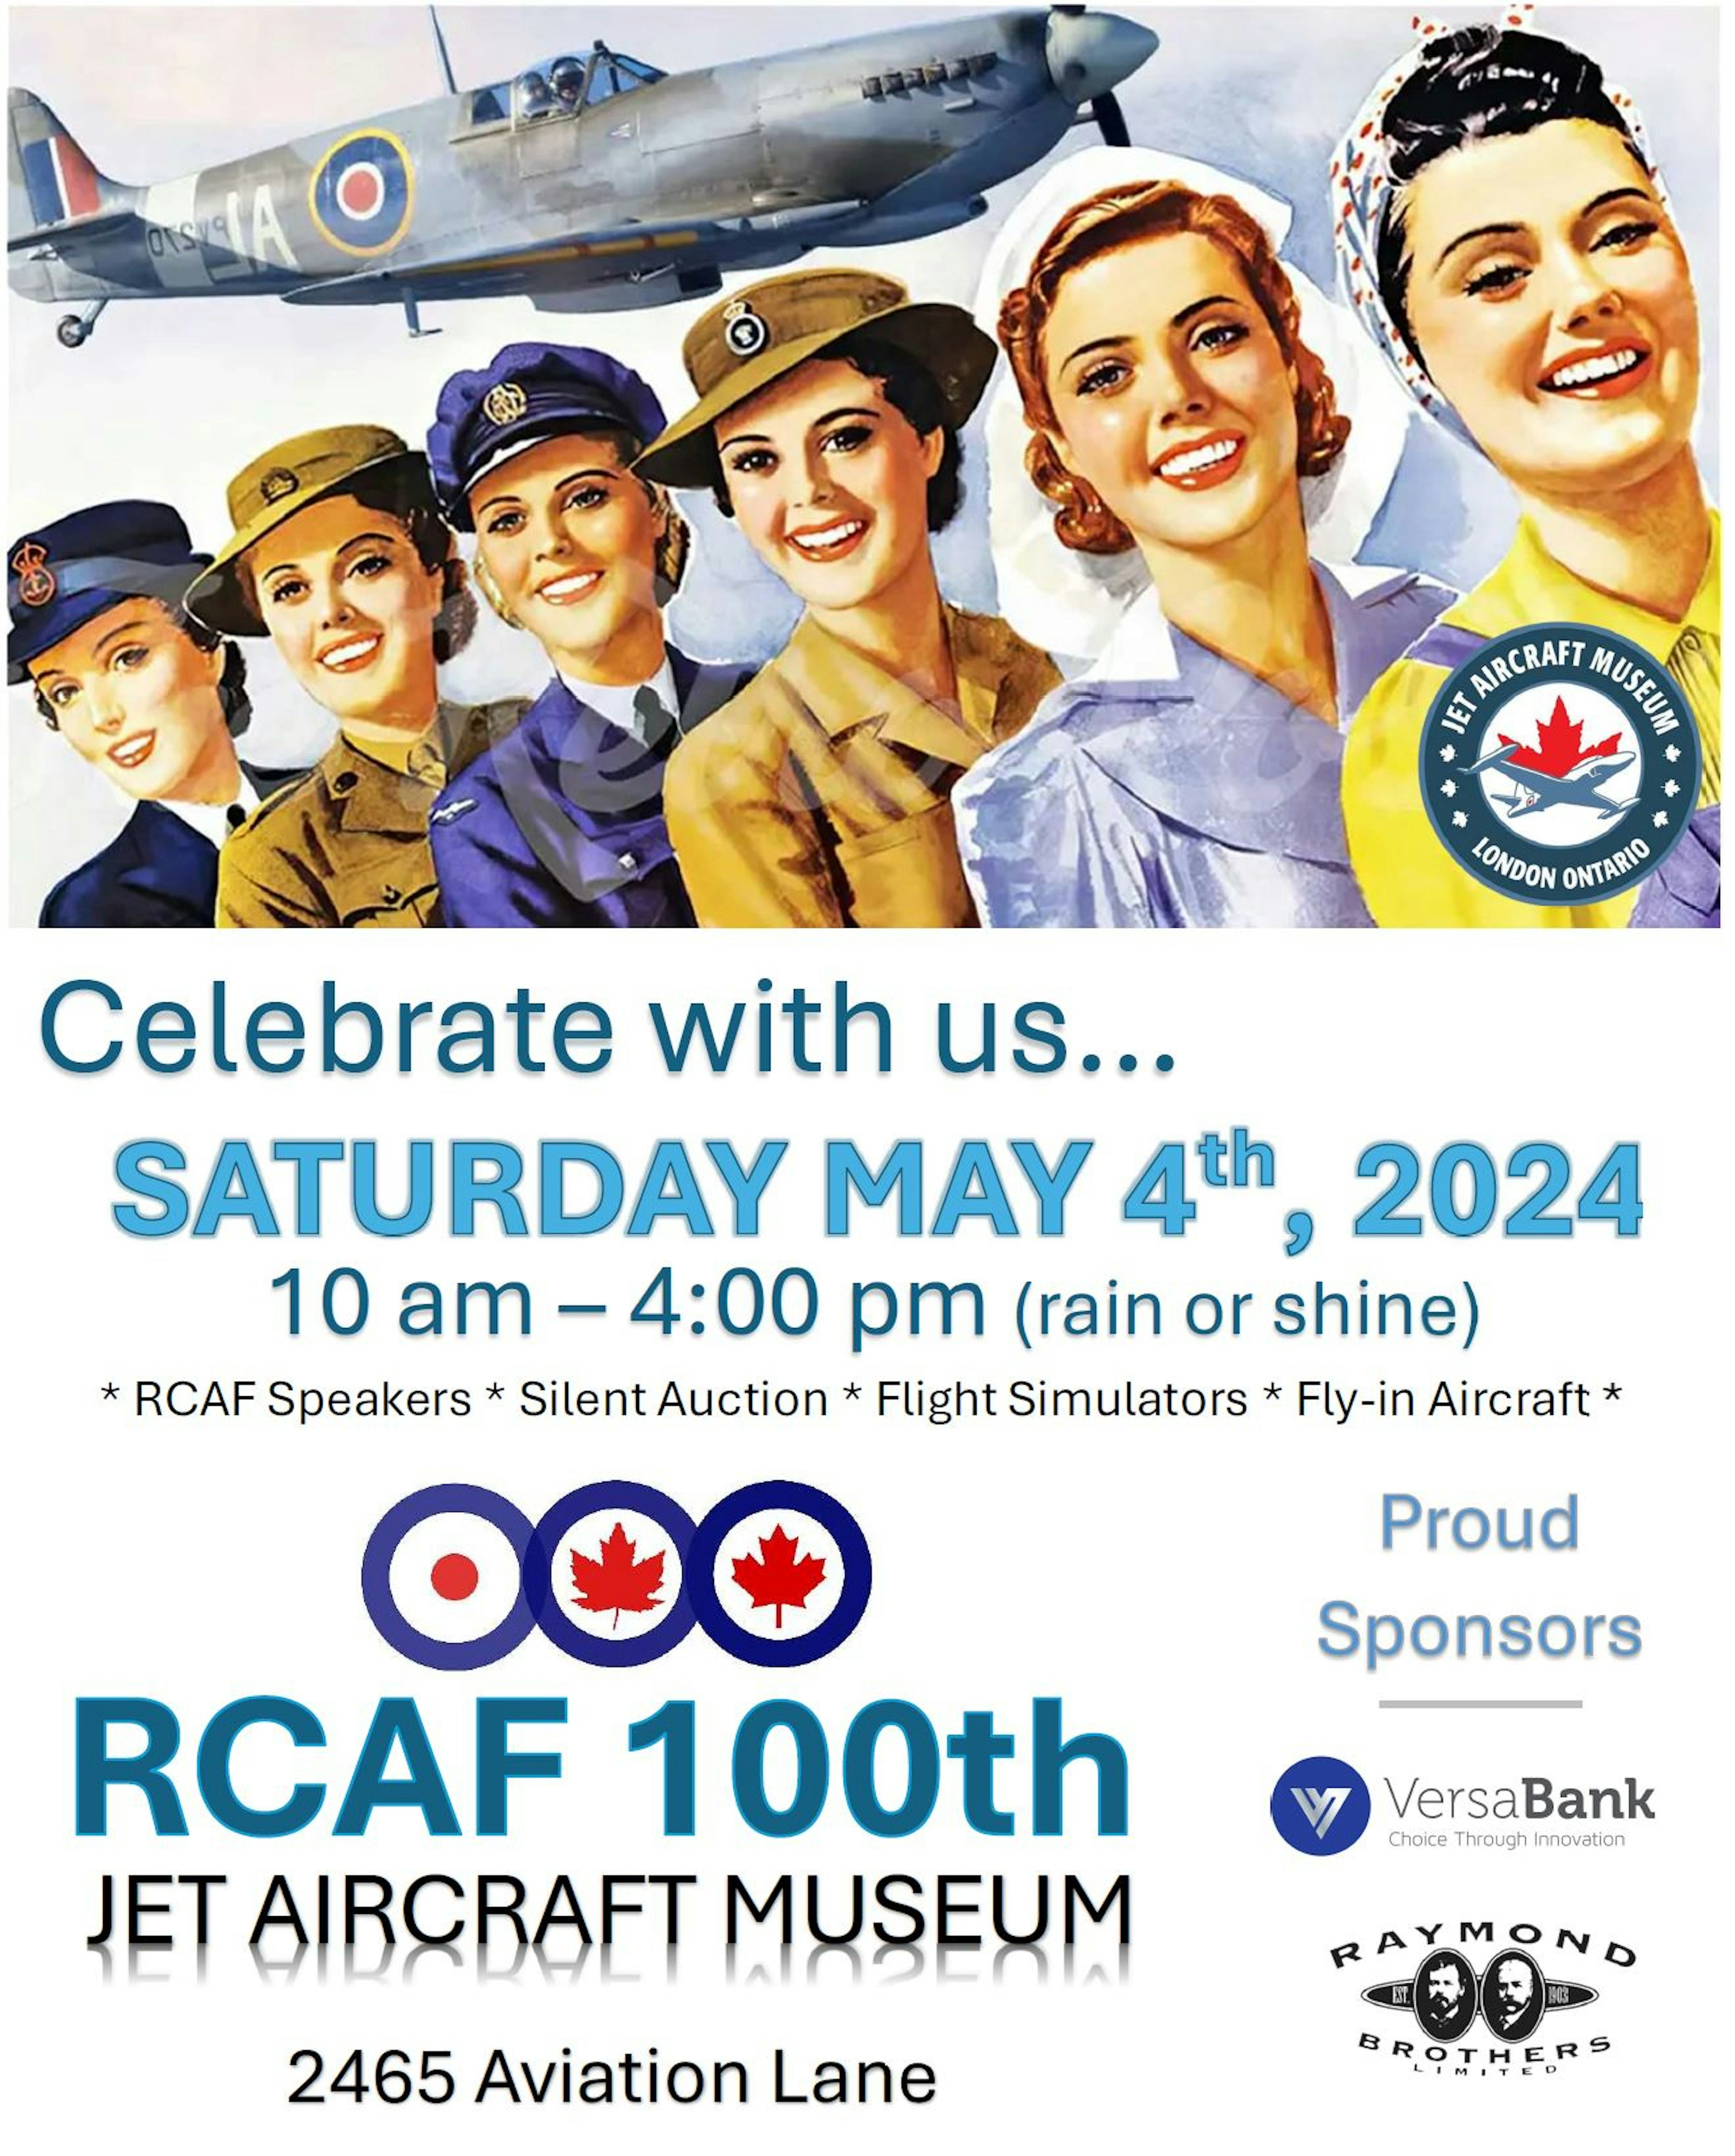 Celebrate with us... Saturday May 4th, 2024 - 10 am to 4 pm RCAF 100th